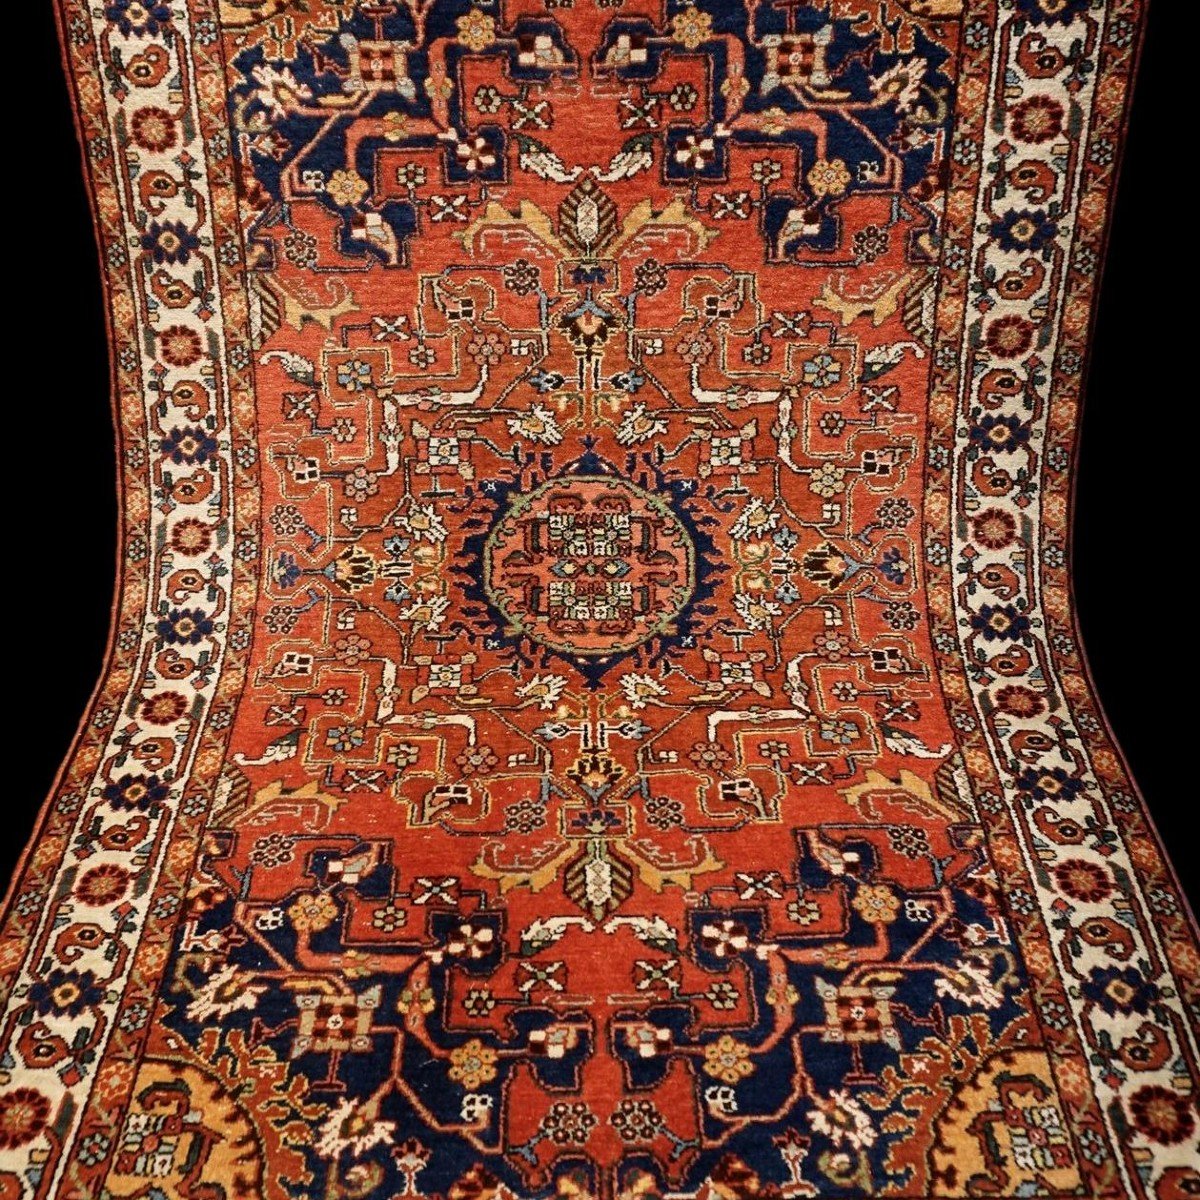 Old Tafresh Rug, 134 X 205 Cm, Hand-knotted Wool In Iran, First Part Of The 20th Century